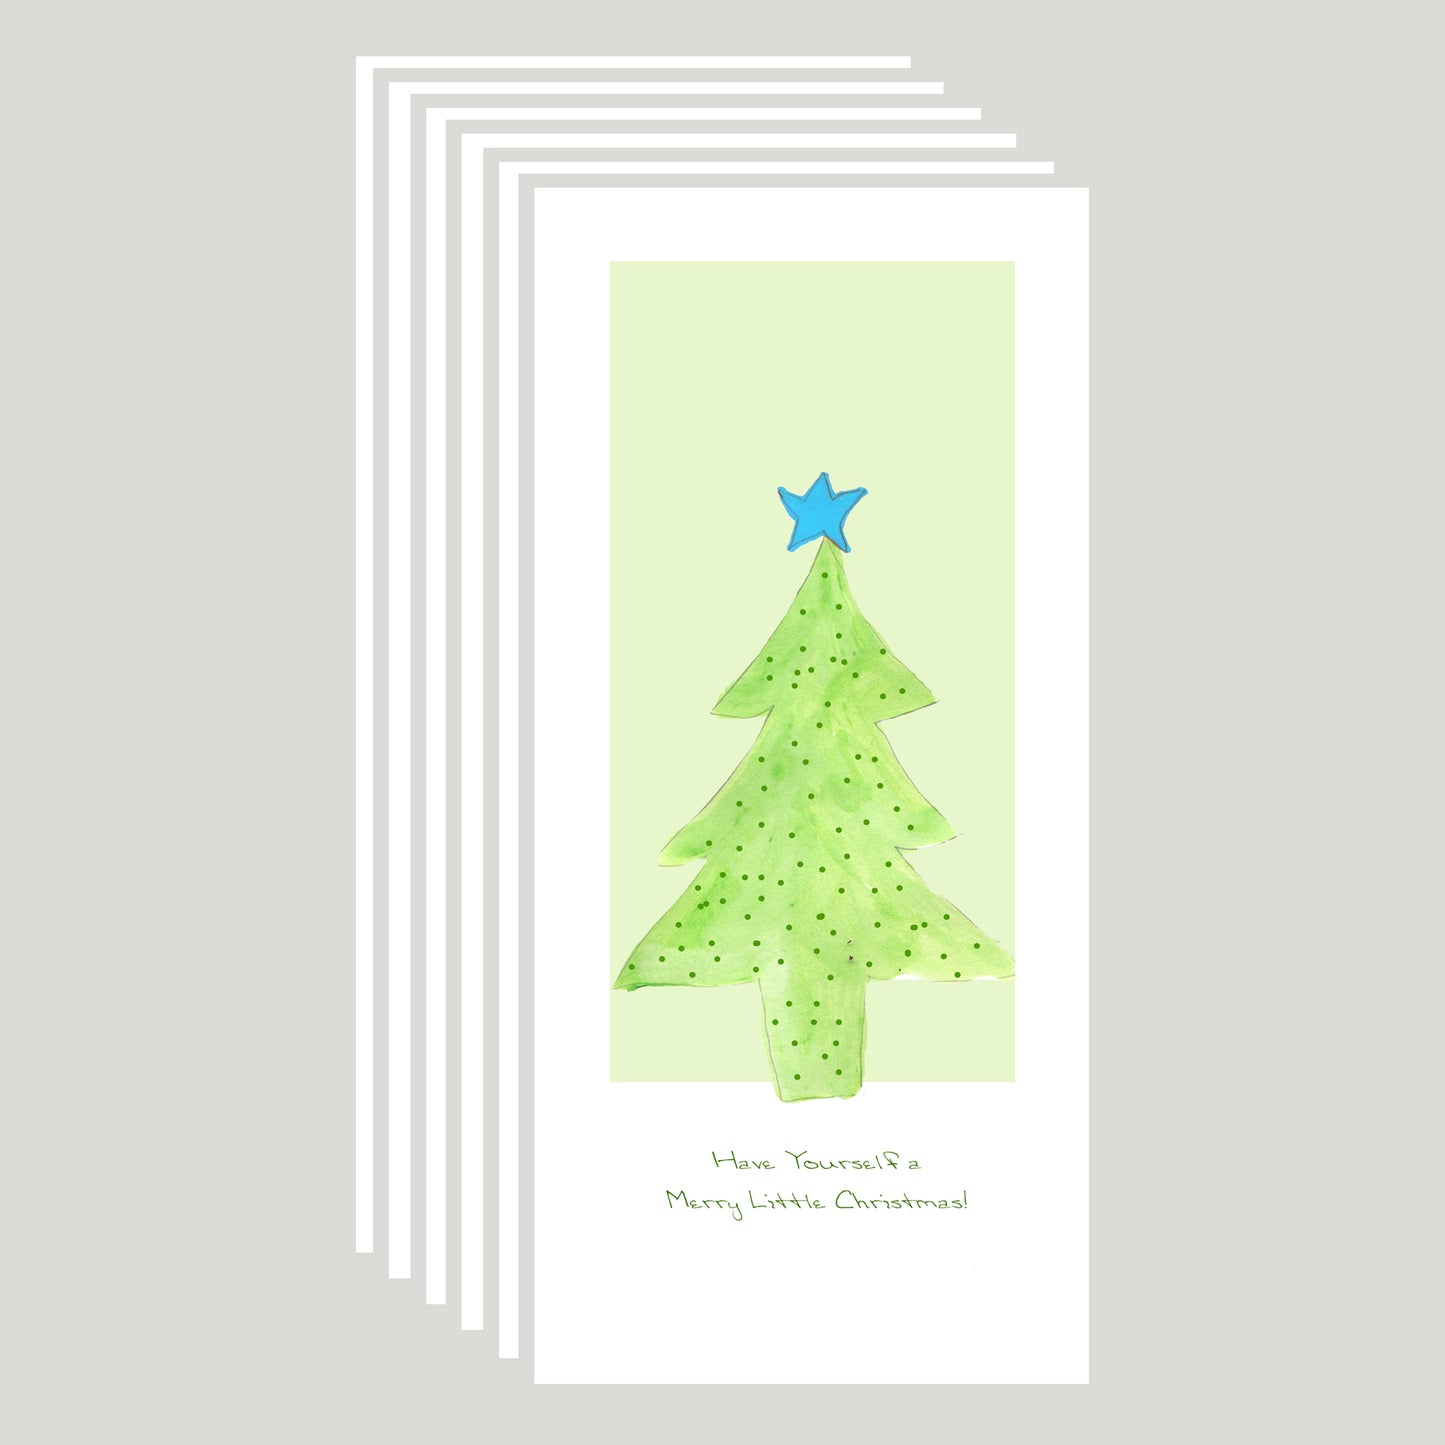 A Very Merry Christmas - Merry Little Tree Note Cards (Six Cards)